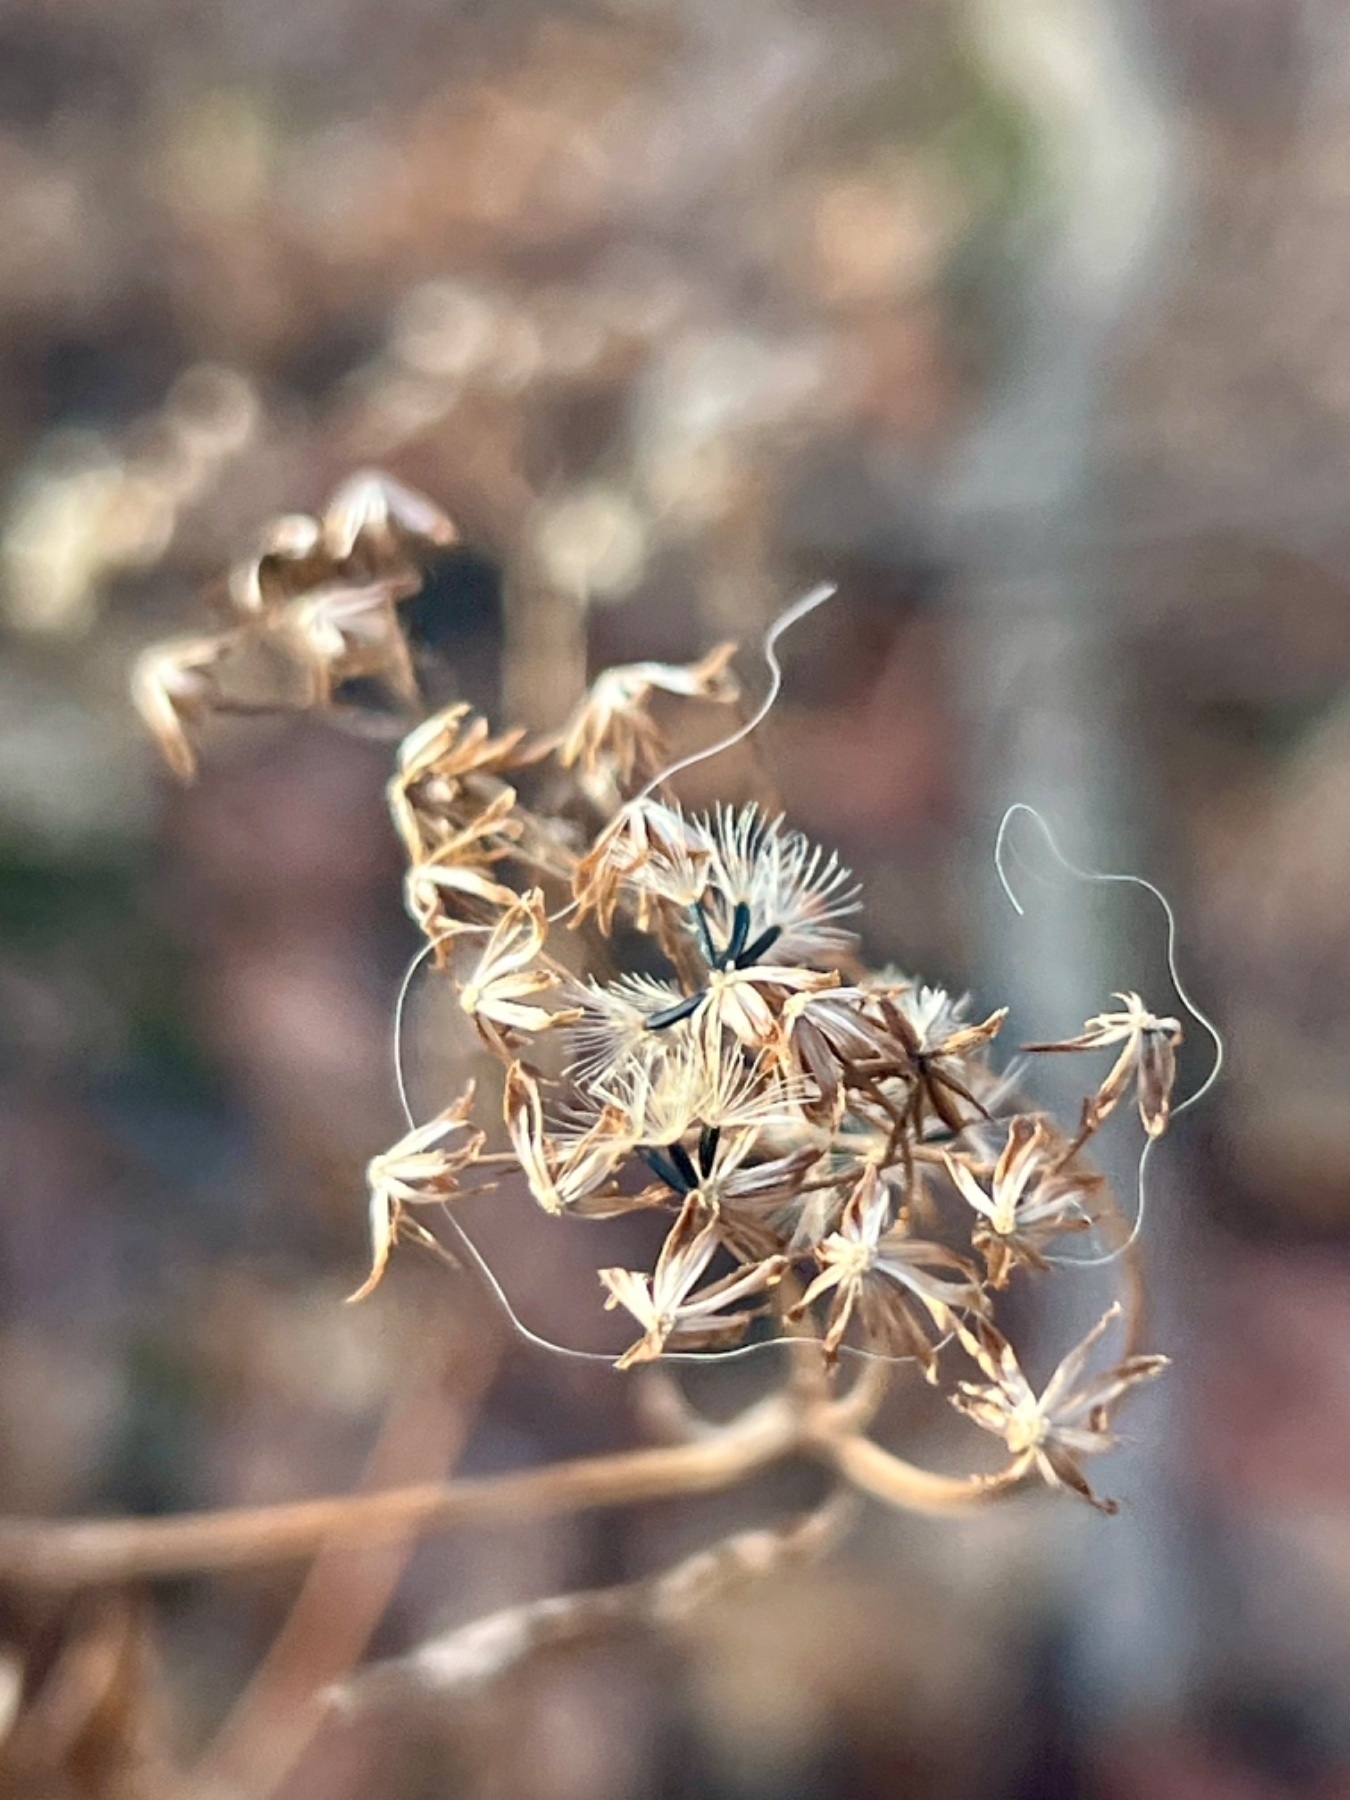 A custer of flowers have turned golden brown for the winter. Amongst the remaining flower parts are several small seeds still attached. The seeds have an elongated black base with tiny white, feathery tendrils to catch the wind. 